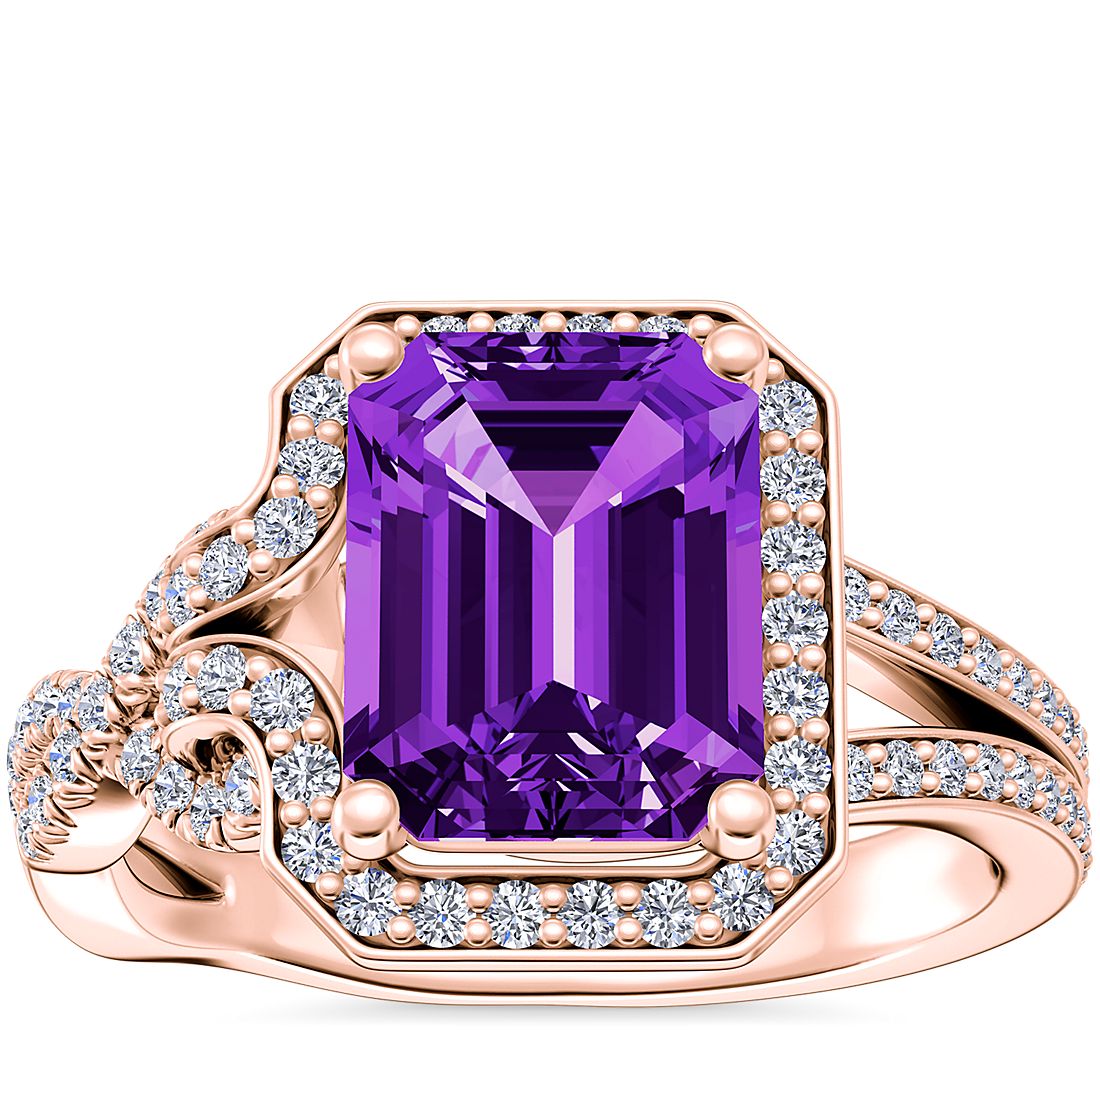 Asymmetrical Diamond Infinity Halo Engagement Ring with Emerald-Cut Amethyst in 14k Rose Gold (9x7mm)